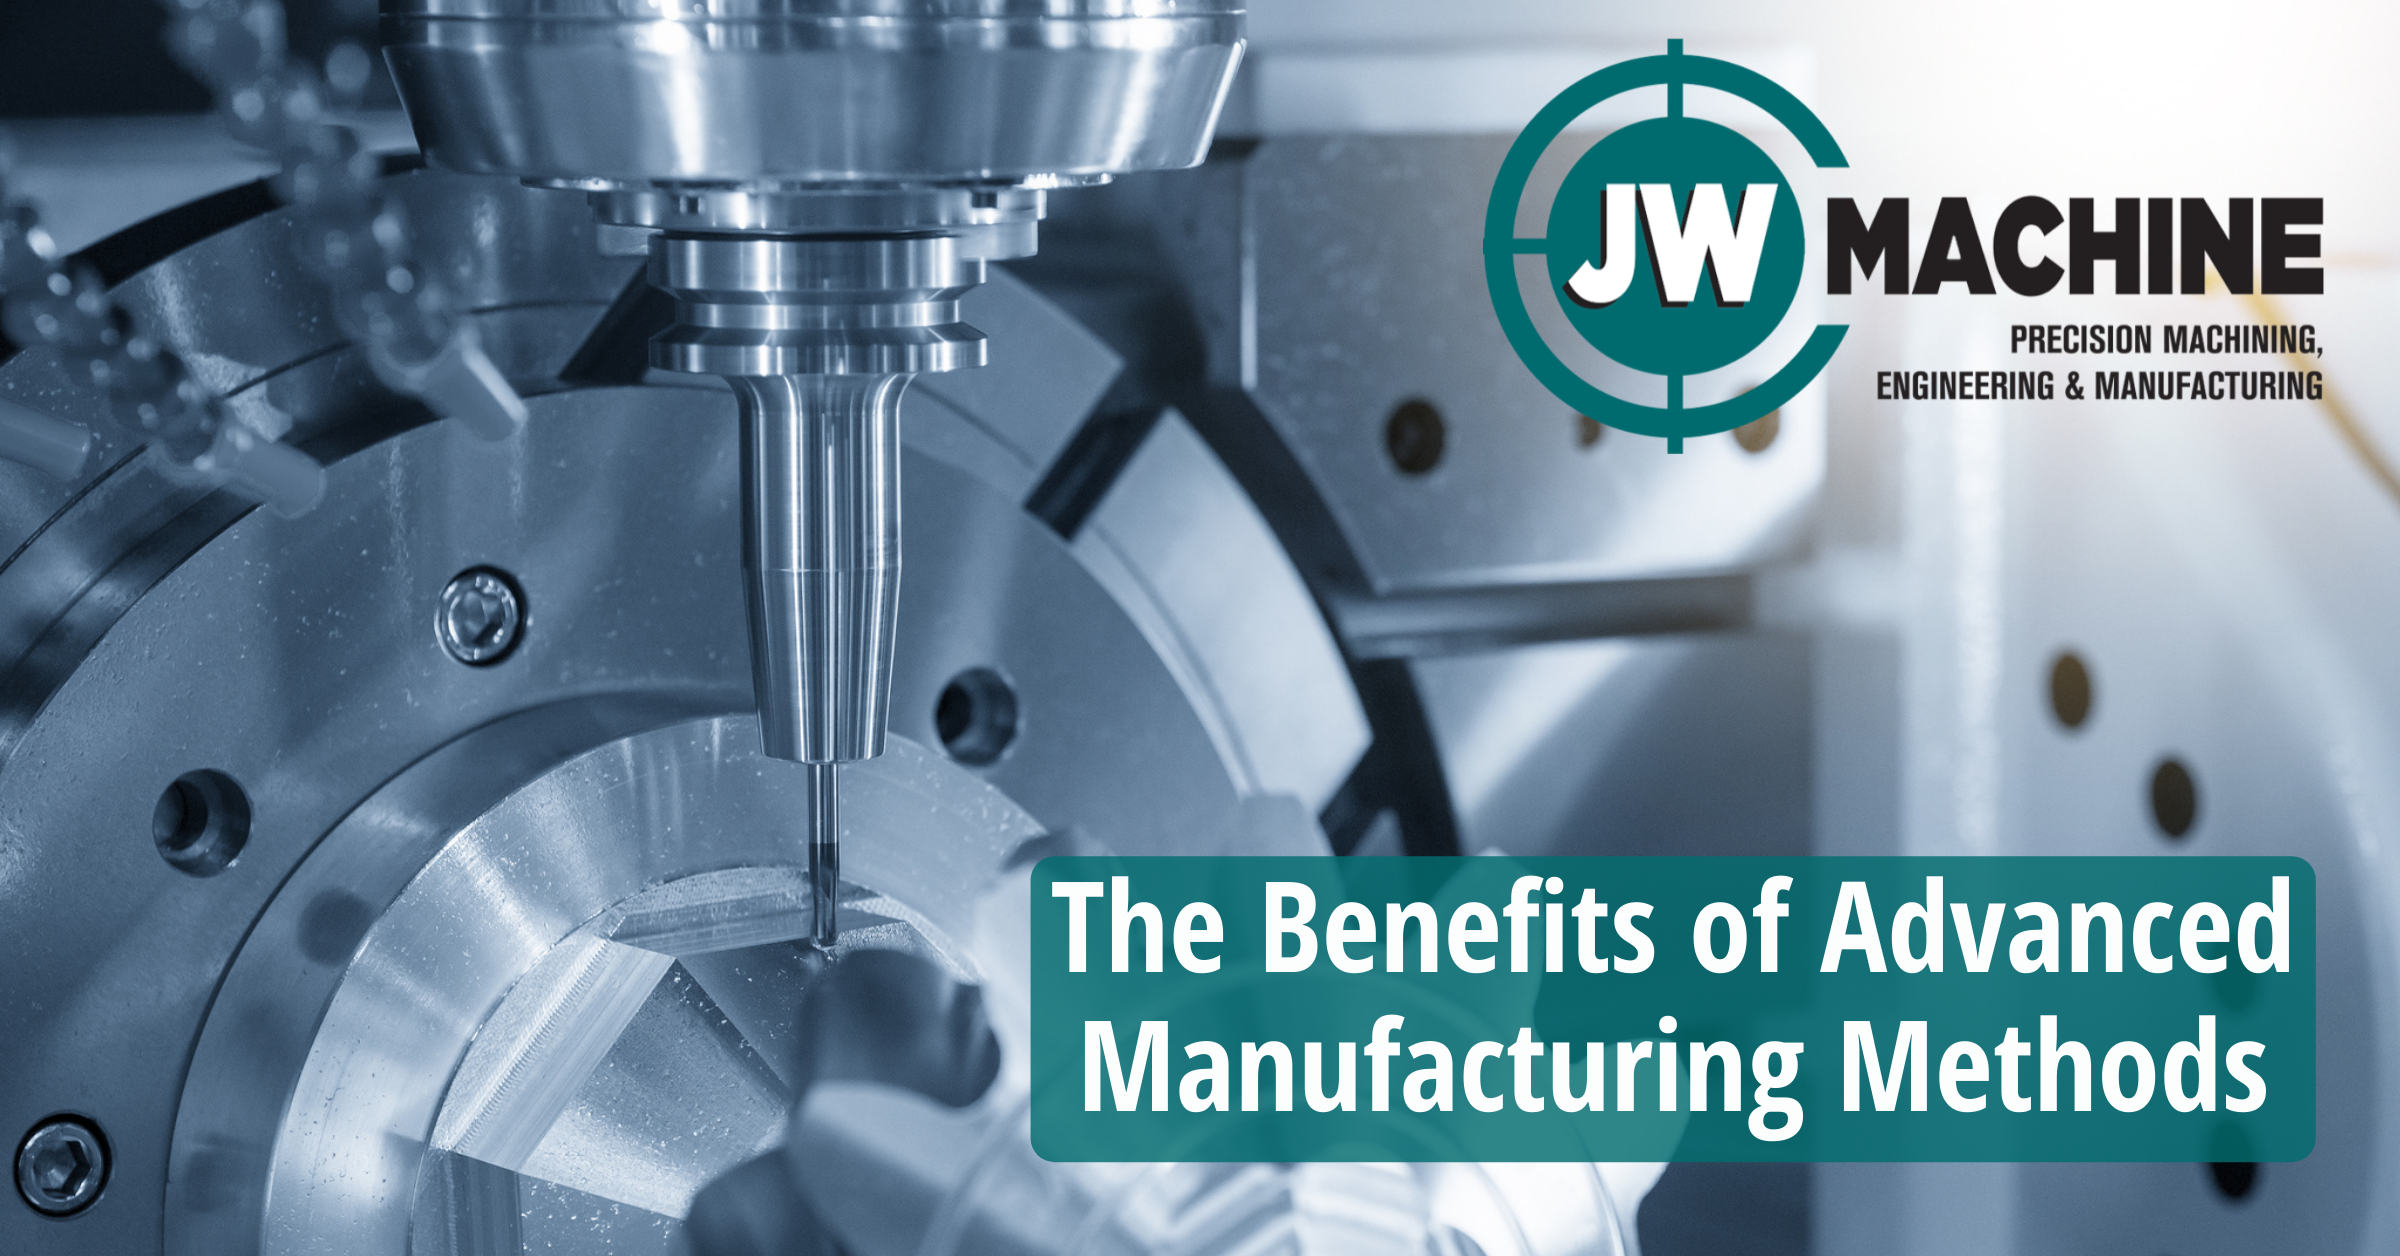 The Benefits of Advanced Manufacturing Methods